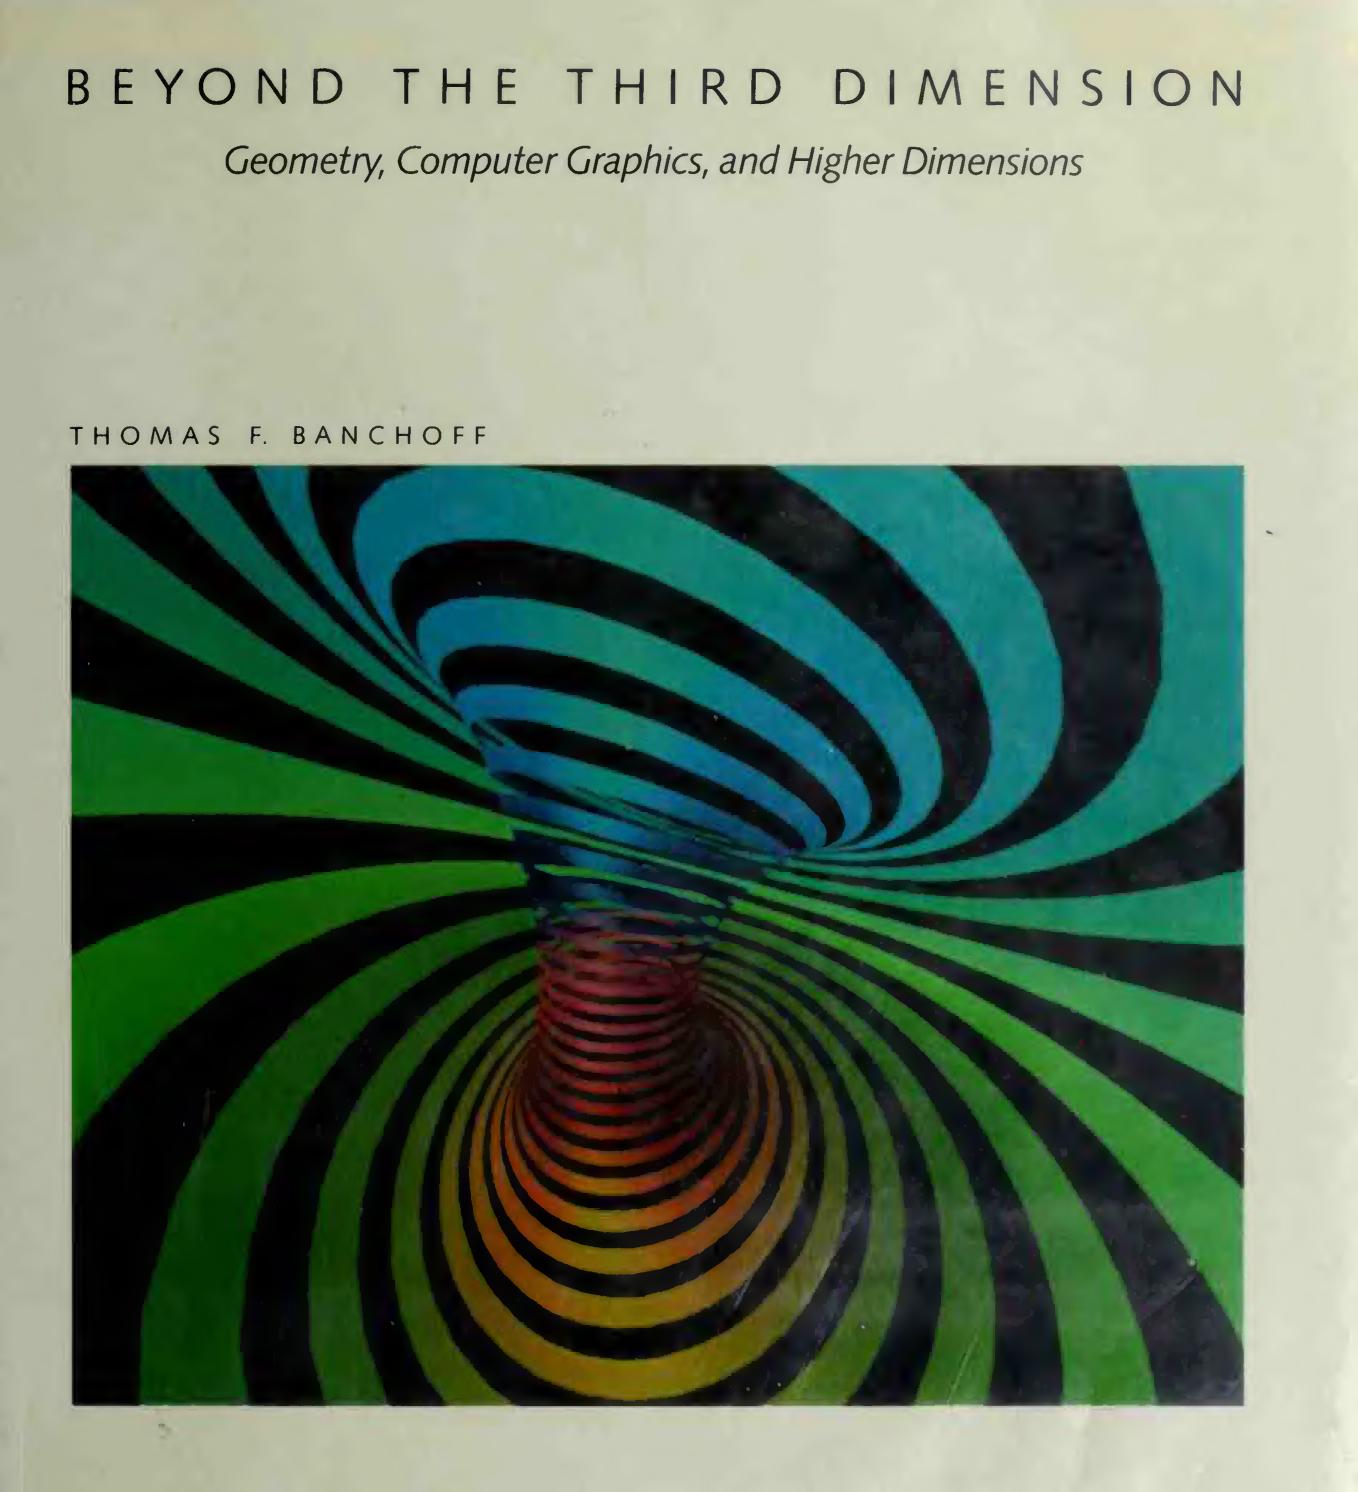 Beyond the Third Dimension: Geometry, Computer Graphics, and Higher Dimensions